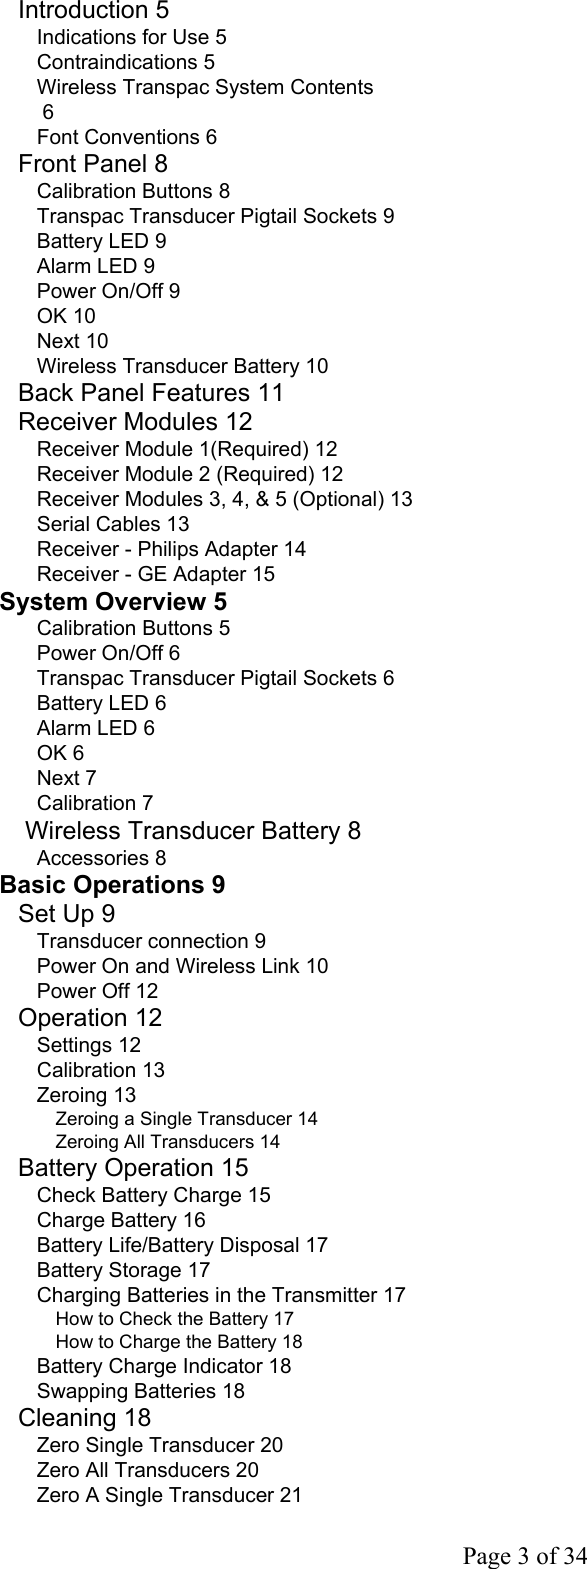  Page 3 of 34 Introduction 5 Indications for Use 5 Contraindications 5 Wireless Transpac System Contents  6 Font Conventions 6 Front Panel 8 Calibration Buttons 8 Transpac Transducer Pigtail Sockets 9 Battery LED 9 Alarm LED 9 Power On/Off 9 OK 10 Next 10 Wireless Transducer Battery 10 Back Panel Features 11 Receiver Modules 12 Receiver Module 1(Required) 12 Receiver Module 2 (Required) 12 Receiver Modules 3, 4, &amp; 5 (Optional) 13 Serial Cables 13 Receiver - Philips Adapter 14 Receiver - GE Adapter 15 System Overview 5 Calibration Buttons 5 Power On/Off 6 Transpac Transducer Pigtail Sockets 6 Battery LED 6 Alarm LED 6 OK 6 Next 7 Calibration 7  Wireless Transducer Battery 8 Accessories 8 Basic Operations 9 Set Up 9 Transducer connection 9 Power On and Wireless Link 10 Power Off 12 Operation 12 Settings 12 Calibration 13 Zeroing 13 Zeroing a Single Transducer 14 Zeroing All Transducers 14 Battery Operation 15 Check Battery Charge 15 Charge Battery 16 Battery Life/Battery Disposal 17 Battery Storage 17 Charging Batteries in the Transmitter 17 How to Check the Battery 17 How to Charge the Battery 18 Battery Charge Indicator 18 Swapping Batteries 18 Cleaning 18 Zero Single Transducer 20 Zero All Transducers 20 Zero A Single Transducer 21 